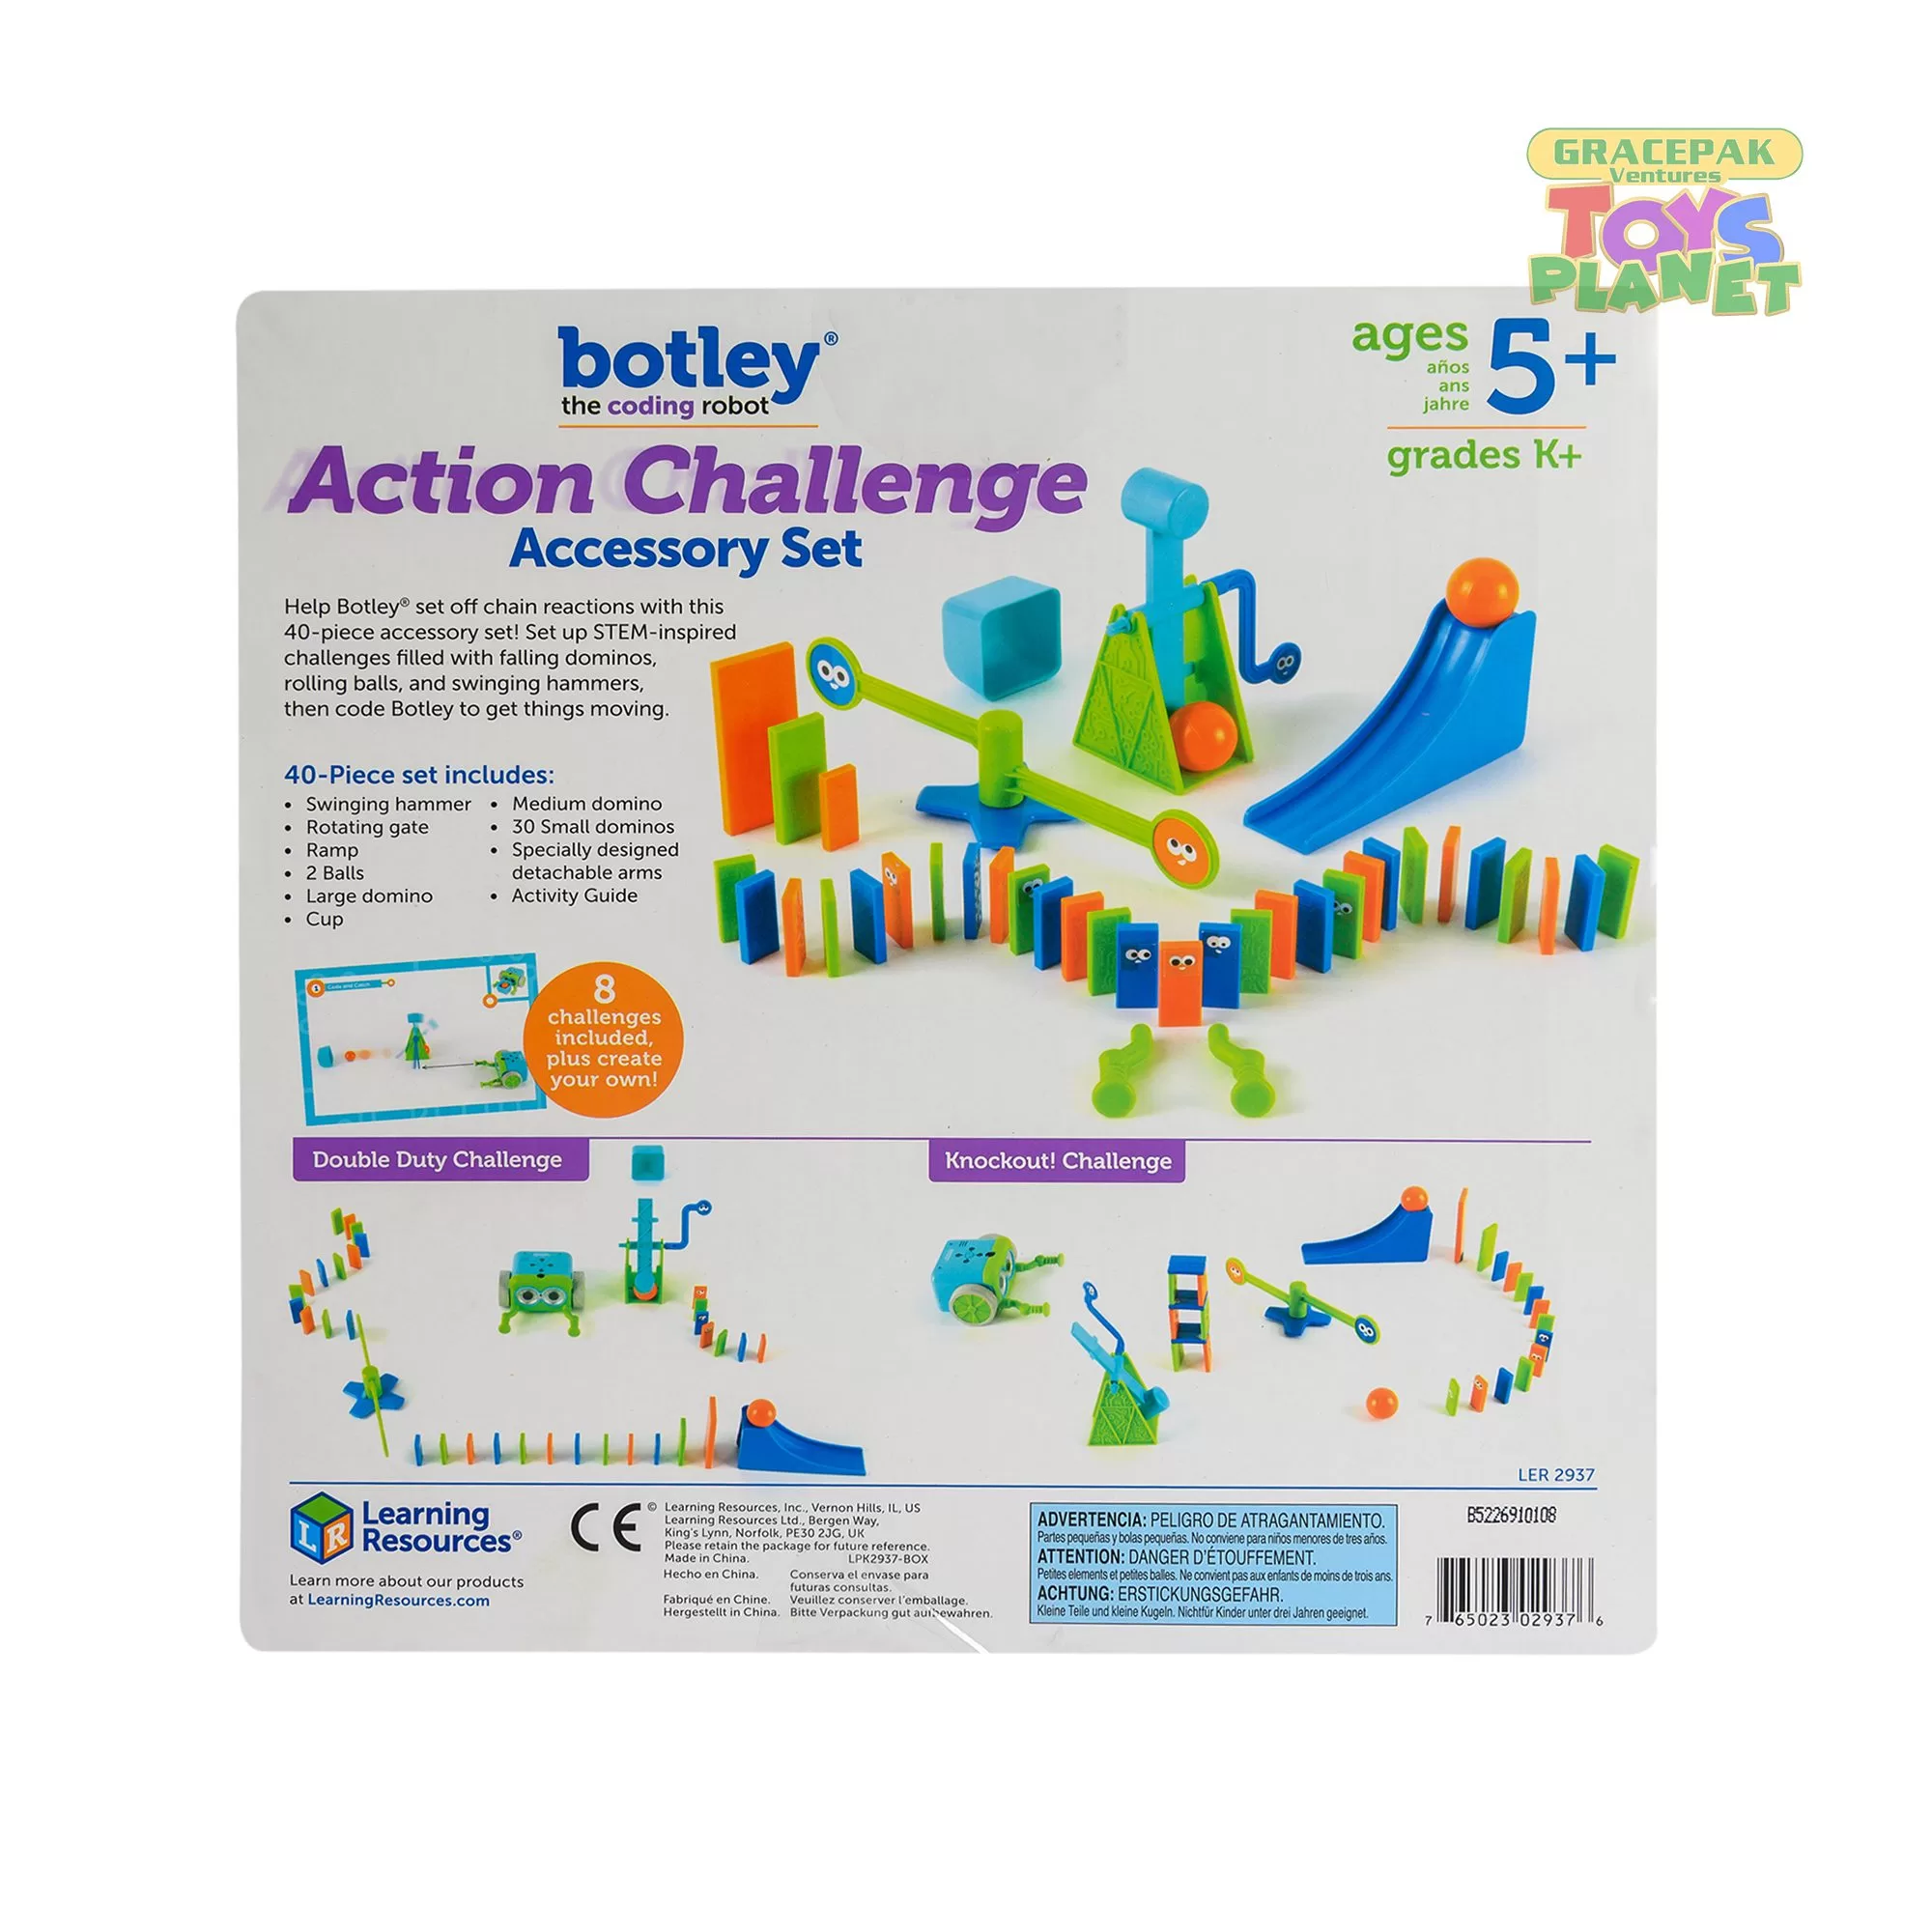 Action Challenge Accessory Set for Botley The Coding Robot